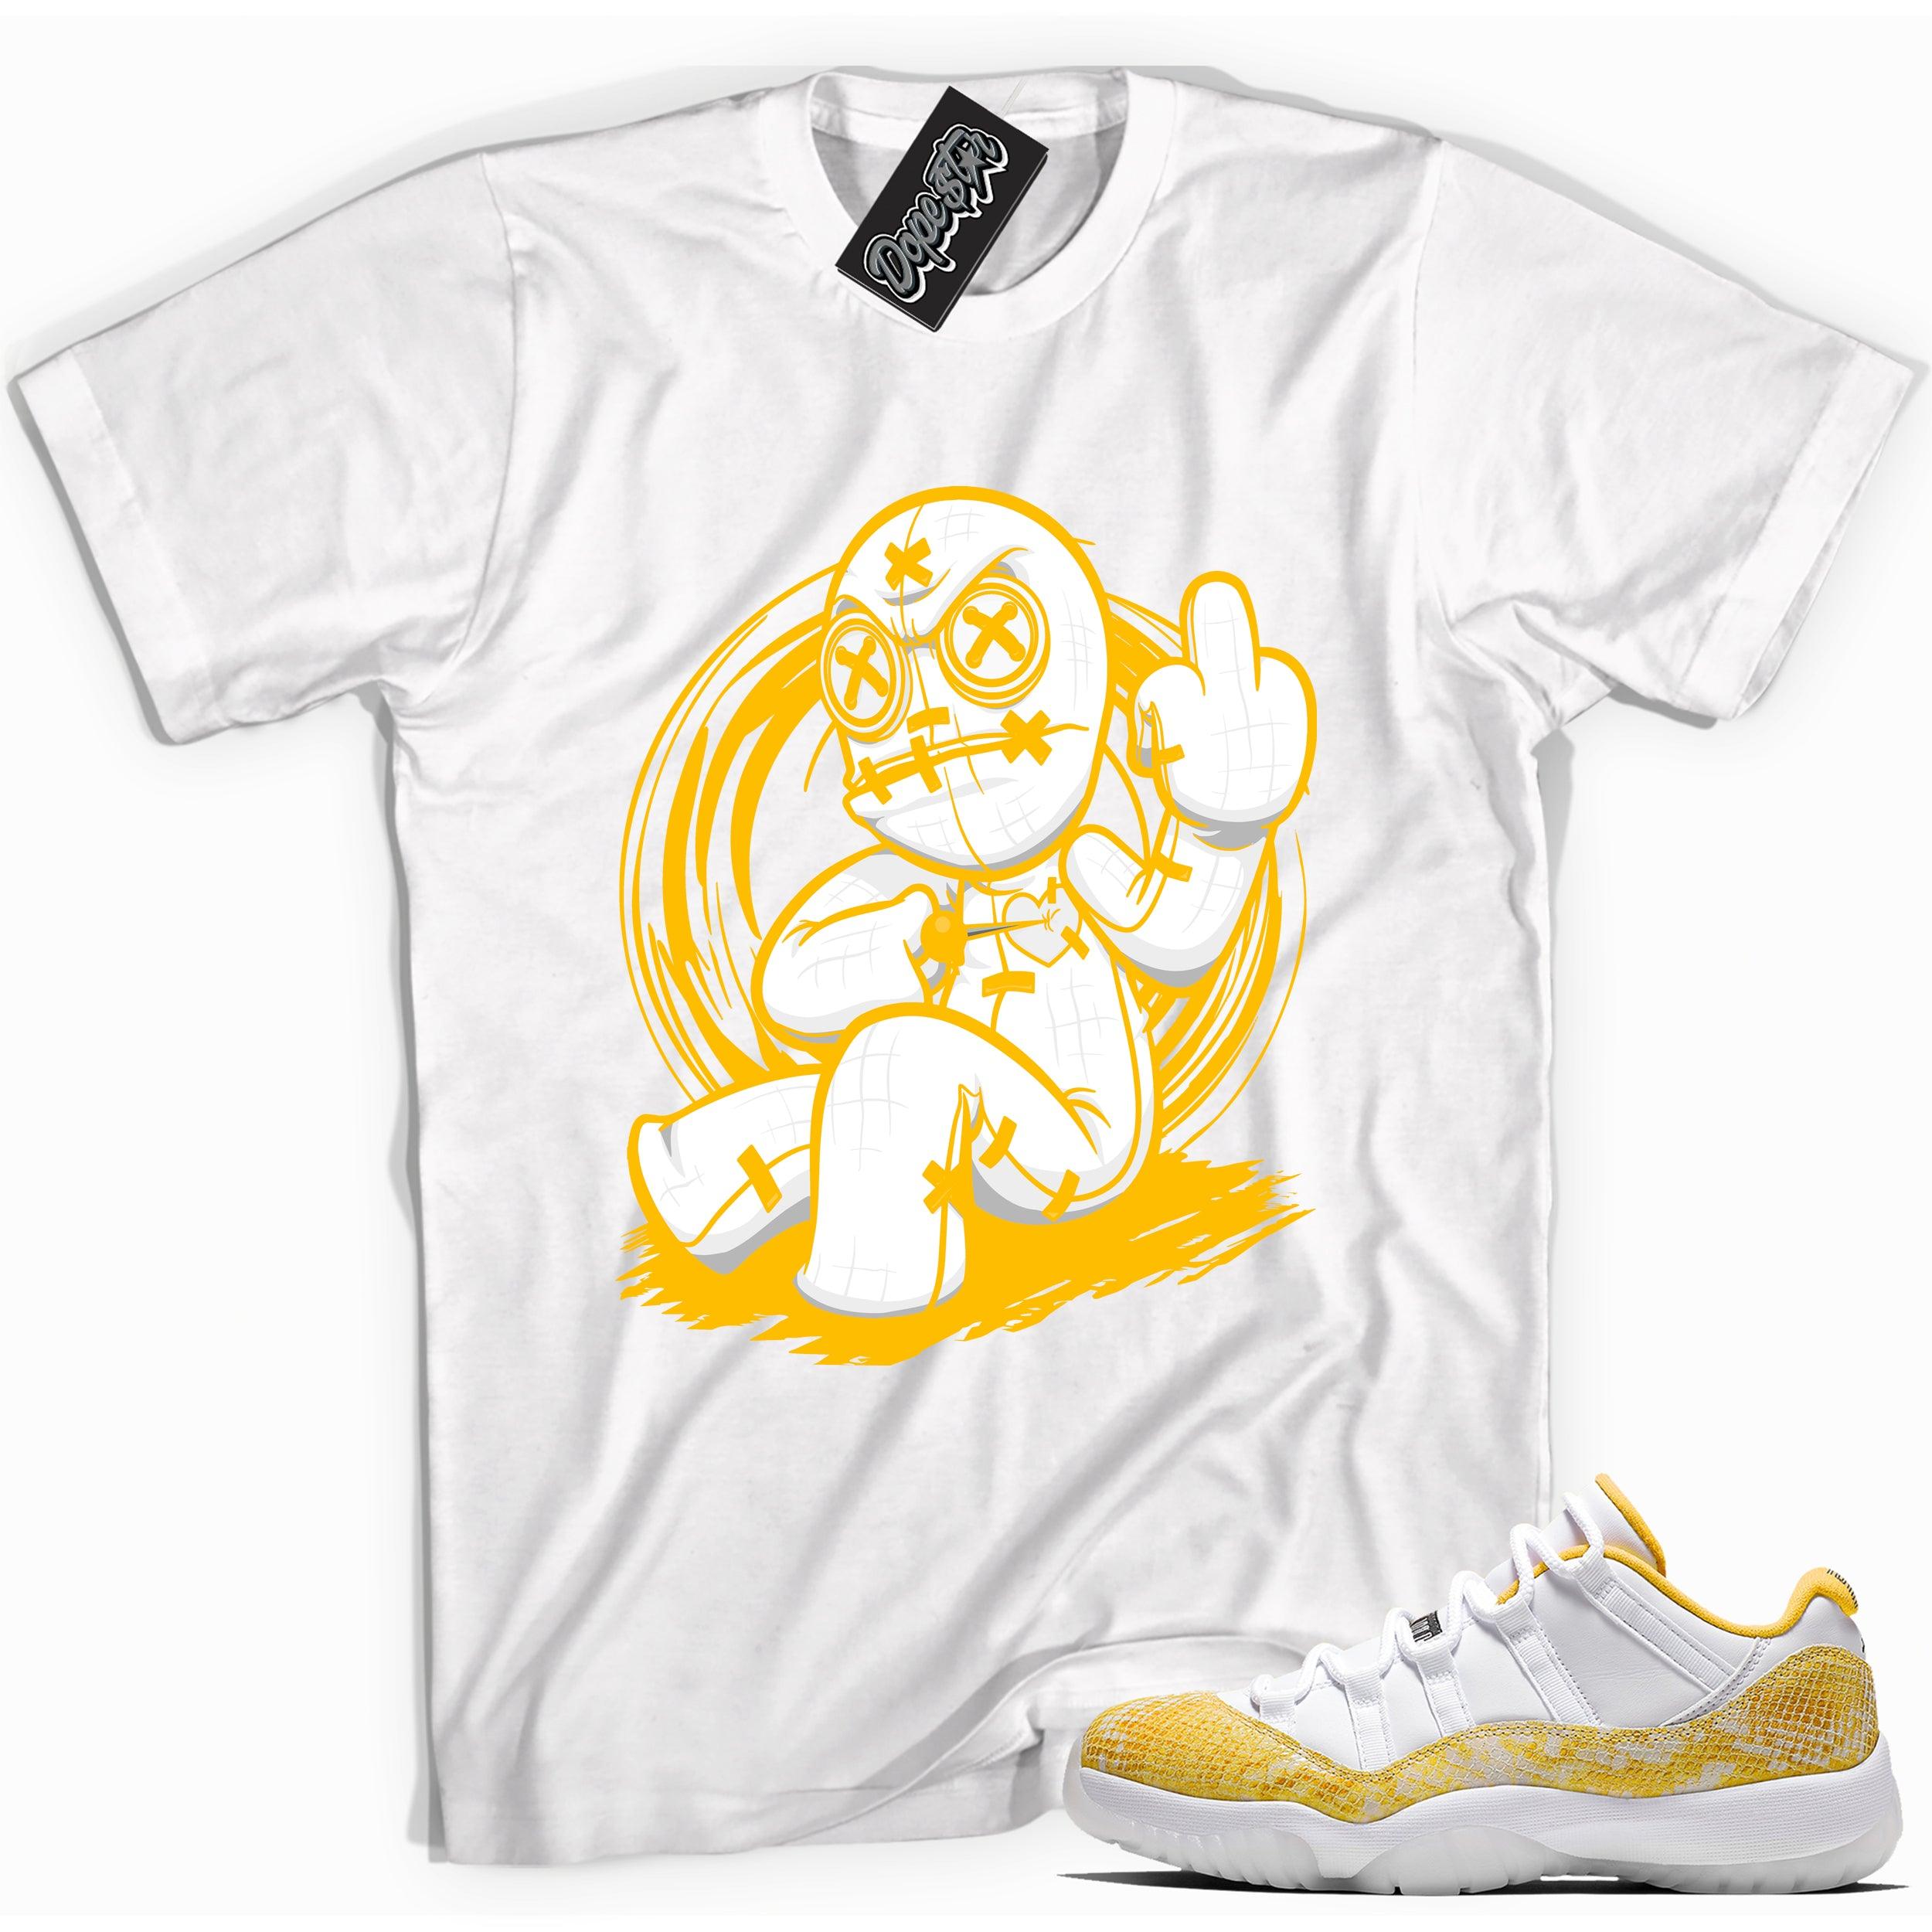 Cool white graphic tee with 'voodoo doll' print, that perfectly matches Air Jordan 11 Retro Low Yellow Snakeskin sneakers